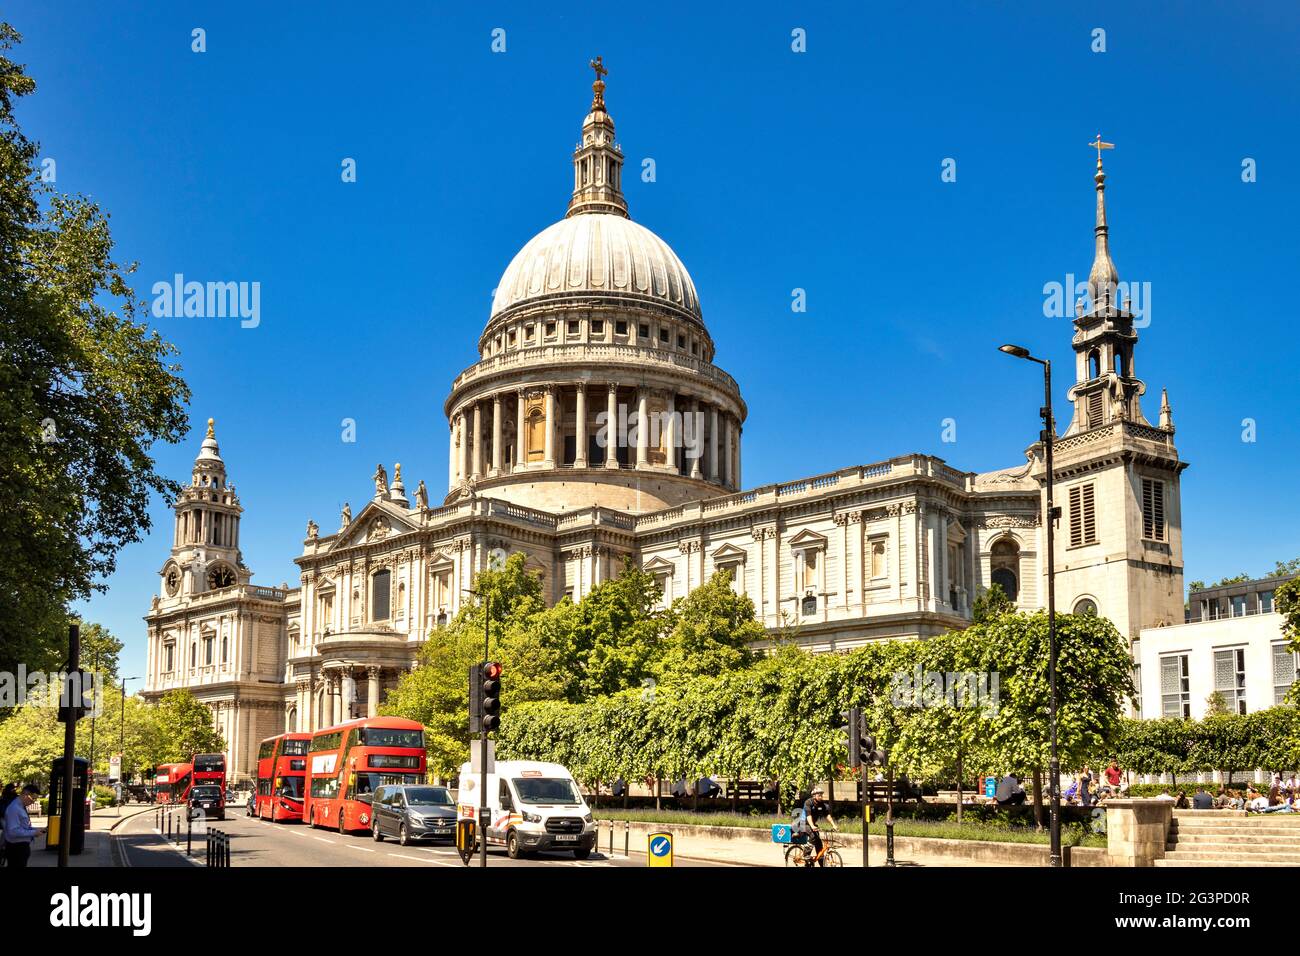 LONDON ENGLAND ST. PAULS CATHEDRAL AND  RED DOUBLE DECKER BUSES ON A SUMMER'S DAY Stock Photo